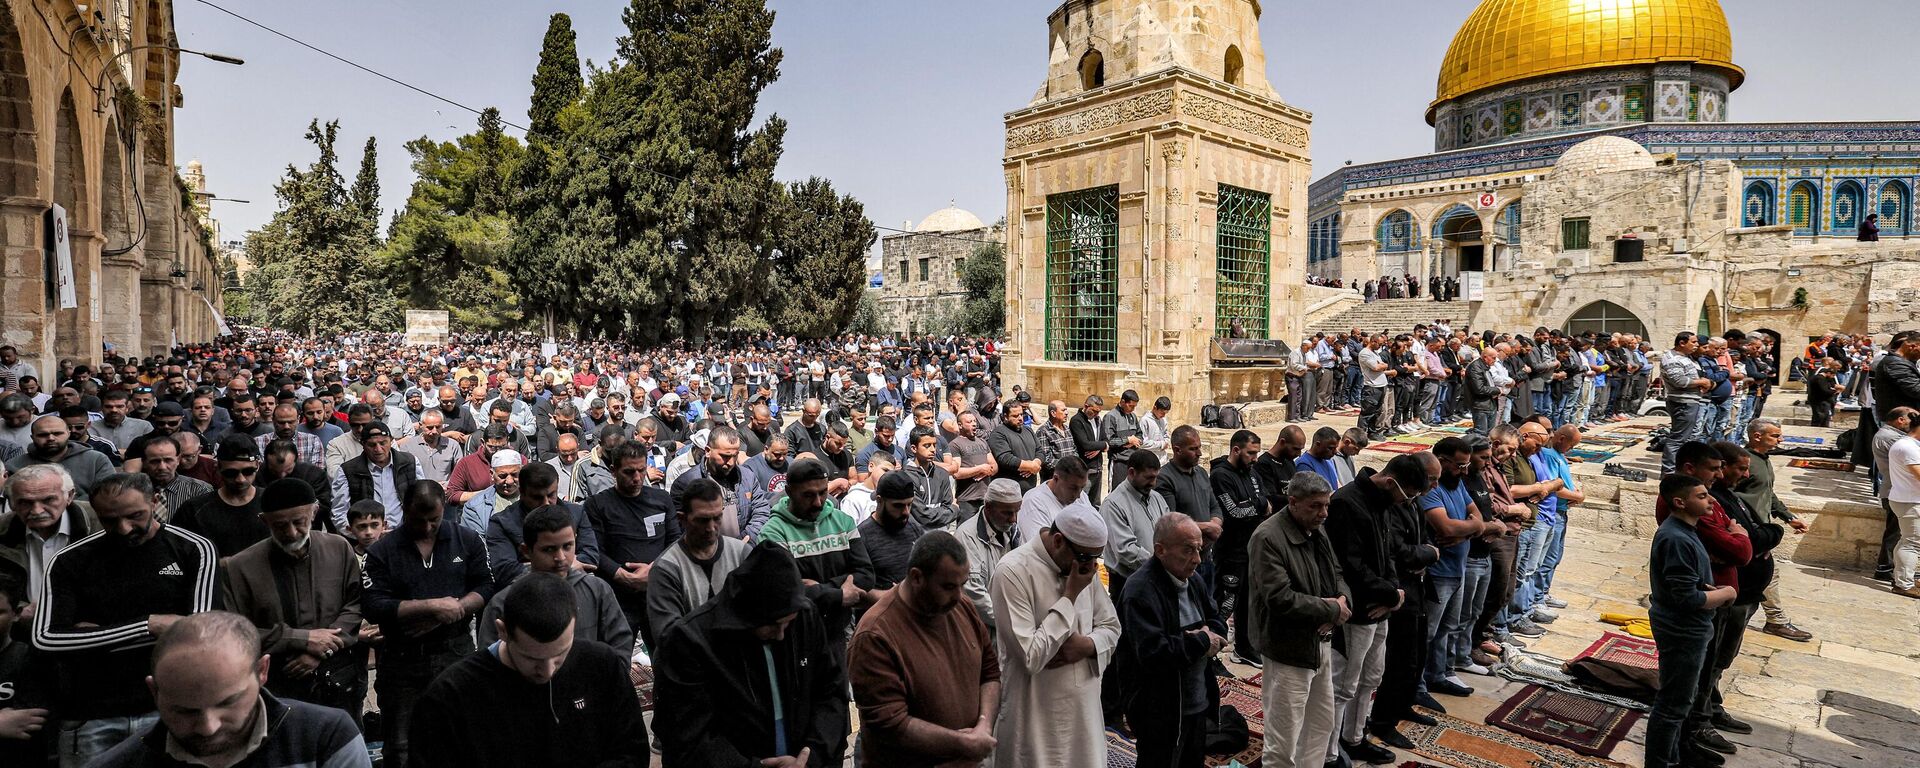 Muslim worshippers pray outside the Dome of the Rock shrine at al-Aqsa mosque compound in the Old City of Jerusalem on April 7, 2023 on the third Friday Noon prayer during the Muslim holy fasting month of Ramada - Sputnik International, 1920, 08.04.2023